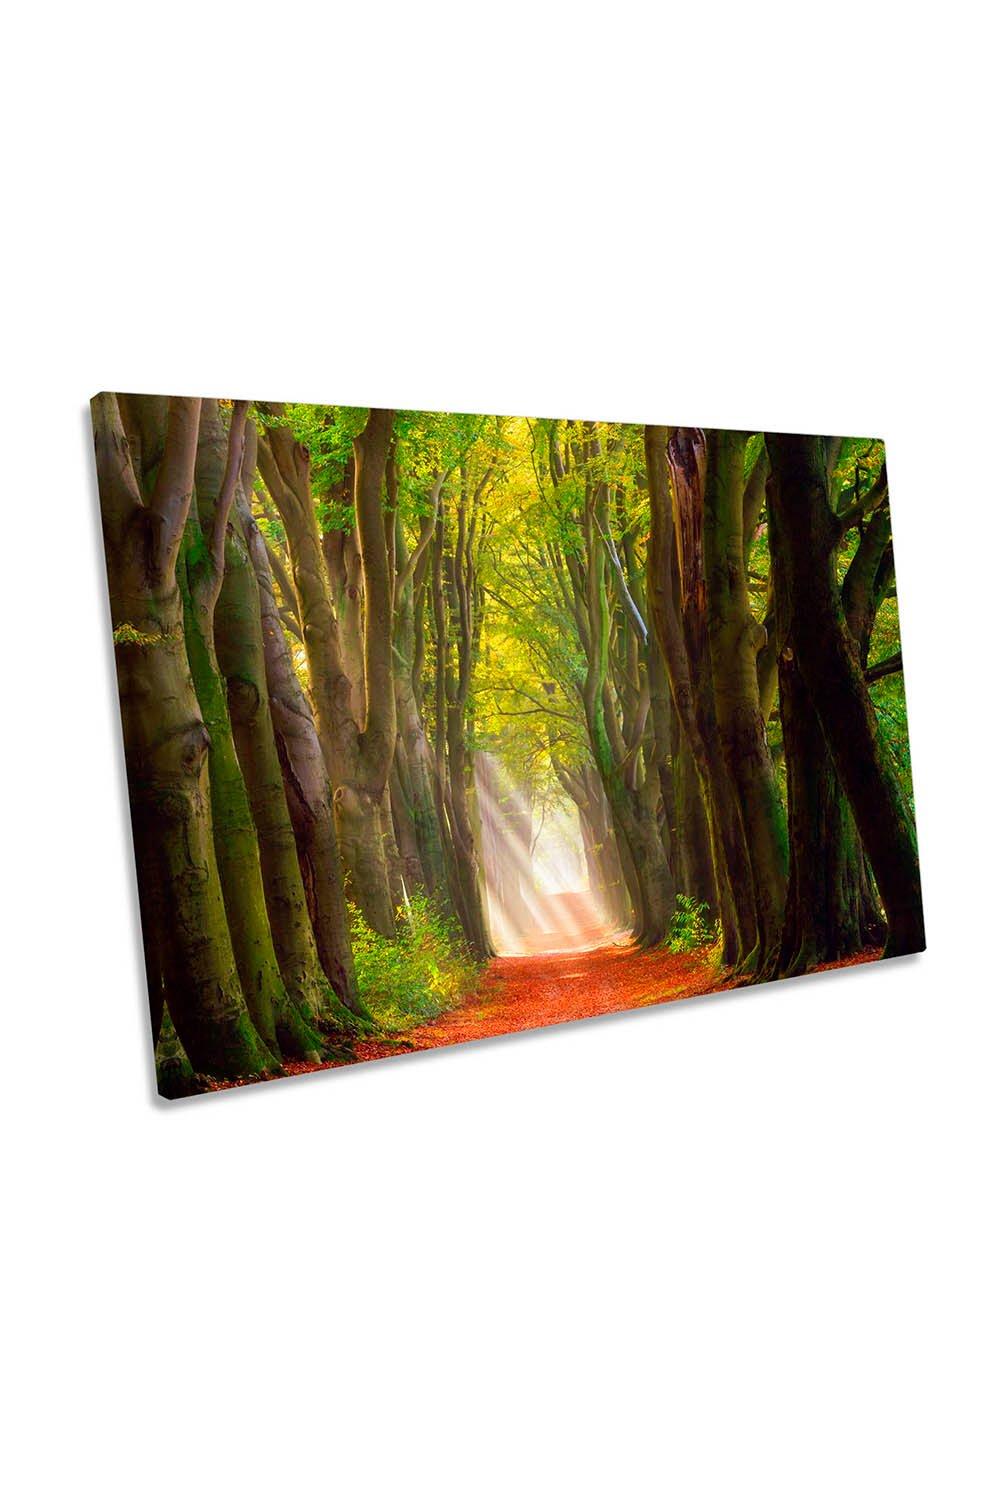 A Glorious Day Forest Trees Path Canvas Wall Art Picture Print